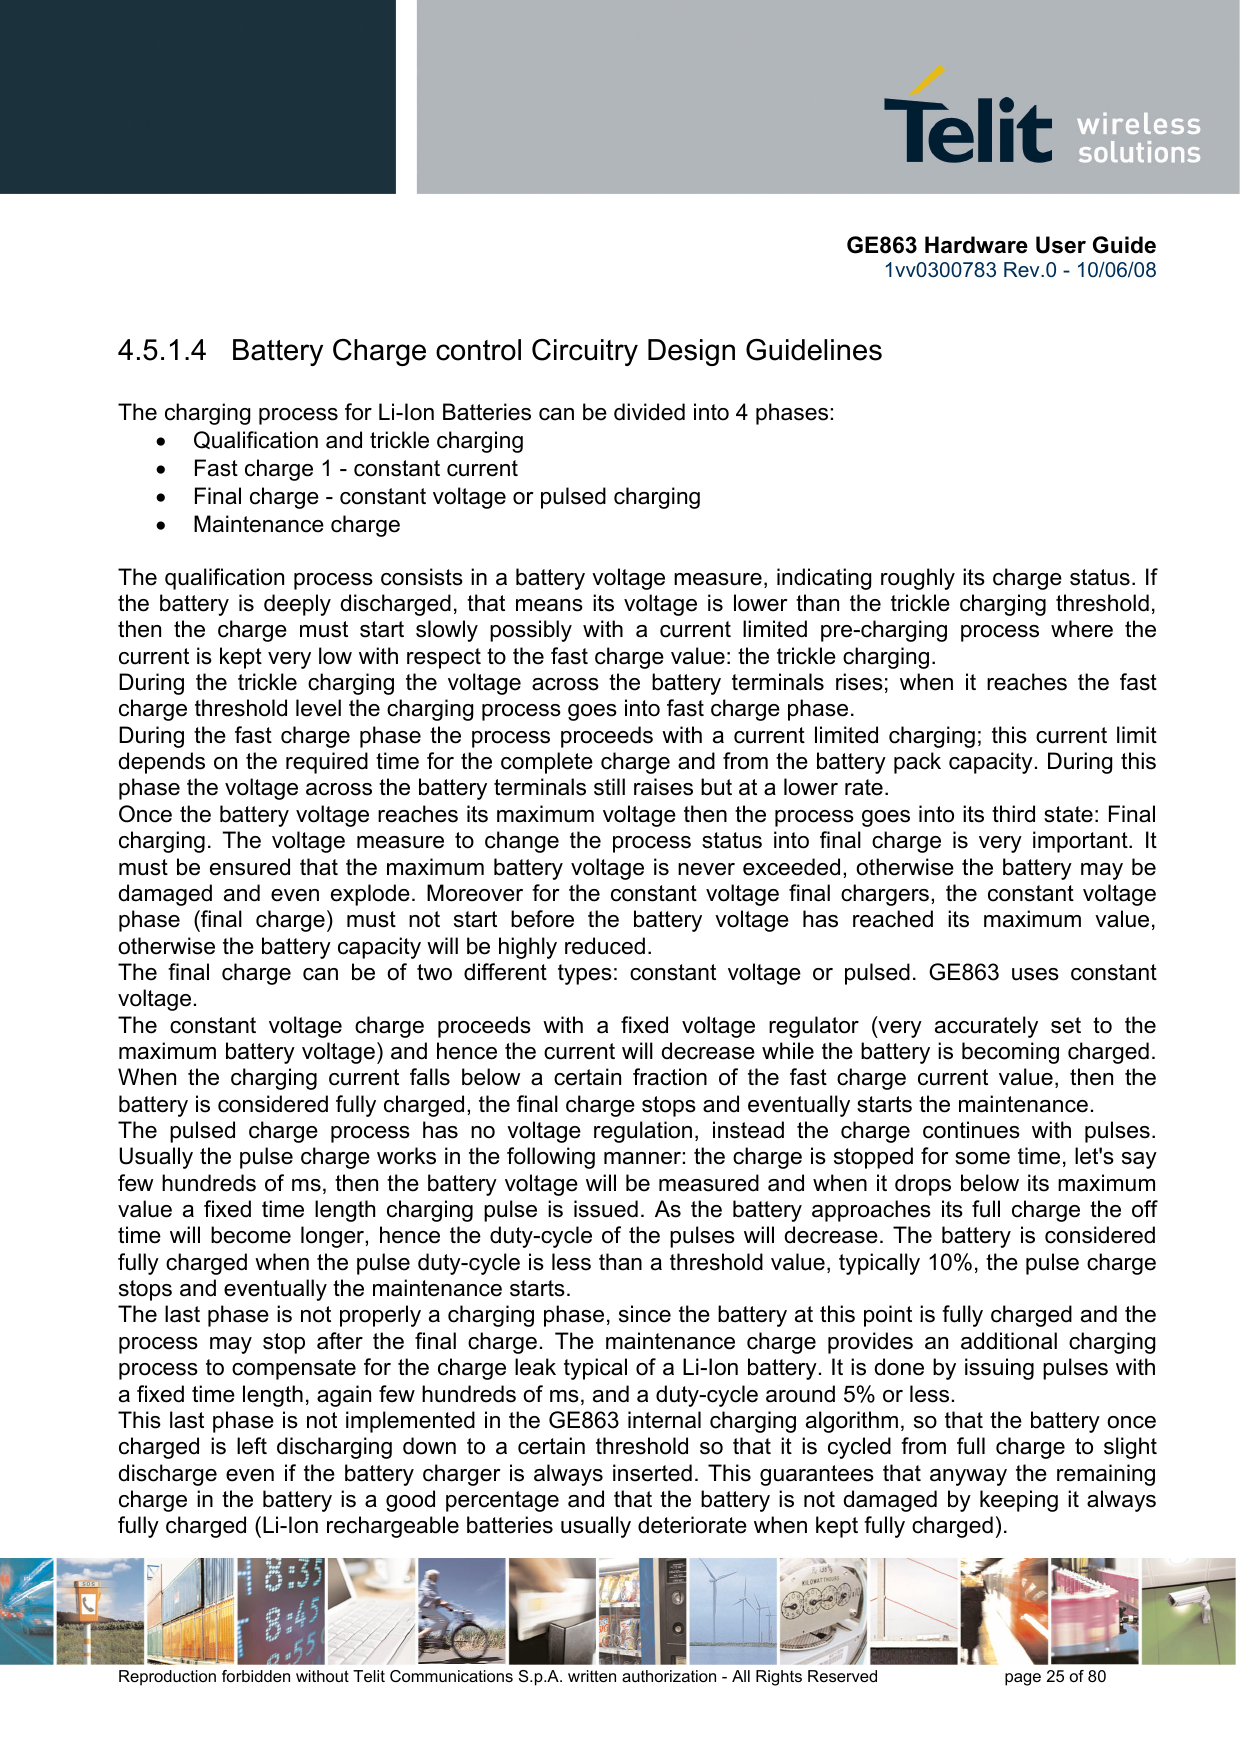       GE863 Hardware User Guide 1vv0300783 Rev.0 - 10/06/08 Reproduction forbidden without Telit Communications S.p.A. written authorization - All Rights Reserved    page 25 of 80   4.5.1.4   Battery Charge control Circuitry Design Guidelines  The charging process for Li-Ion Batteries can be divided into 4 phases: •  Qualification and trickle charging •  Fast charge 1 - constant current •  Final charge - constant voltage or pulsed charging •  Maintenance charge   The qualification process consists in a battery voltage measure, indicating roughly its charge status. If the battery is deeply discharged, that means its voltage is lower than the trickle charging threshold, then the charge must start slowly possibly with a current limited pre-charging process where the current is kept very low with respect to the fast charge value: the trickle charging. During the trickle charging the voltage across the battery terminals rises; when it reaches the fast charge threshold level the charging process goes into fast charge phase. During the fast charge phase the process proceeds with a current limited charging; this current limit depends on the required time for the complete charge and from the battery pack capacity. During this phase the voltage across the battery terminals still raises but at a lower rate. Once the battery voltage reaches its maximum voltage then the process goes into its third state: Final charging. The voltage measure to change the process status into final charge is very important. It must be ensured that the maximum battery voltage is never exceeded, otherwise the battery may be damaged and even explode. Moreover for the constant voltage final chargers, the constant voltage phase (final charge) must not start before the battery voltage has reached its maximum value, otherwise the battery capacity will be highly reduced. The final charge can be of two different types: constant voltage or pulsed. GE863 uses constant voltage. The constant voltage charge proceeds with a fixed voltage regulator (very accurately set to the maximum battery voltage) and hence the current will decrease while the battery is becoming charged. When the charging current falls below a certain fraction of the fast charge current value, then the battery is considered fully charged, the final charge stops and eventually starts the maintenance.  The pulsed charge process has no voltage regulation, instead the charge continues with pulses. Usually the pulse charge works in the following manner: the charge is stopped for some time, let&apos;s say few hundreds of ms, then the battery voltage will be measured and when it drops below its maximum value a fixed time length charging pulse is issued. As the battery approaches its full charge the off time will become longer, hence the duty-cycle of the pulses will decrease. The battery is considered fully charged when the pulse duty-cycle is less than a threshold value, typically 10%, the pulse charge stops and eventually the maintenance starts. The last phase is not properly a charging phase, since the battery at this point is fully charged and the process may stop after the final charge. The maintenance charge provides an additional charging process to compensate for the charge leak typical of a Li-Ion battery. It is done by issuing pulses with a fixed time length, again few hundreds of ms, and a duty-cycle around 5% or less.  This last phase is not implemented in the GE863 internal charging algorithm, so that the battery once charged is left discharging down to a certain threshold so that it is cycled from full charge to slight discharge even if the battery charger is always inserted. This guarantees that anyway the remaining charge in the battery is a good percentage and that the battery is not damaged by keeping it always fully charged (Li-Ion rechargeable batteries usually deteriorate when kept fully charged). 